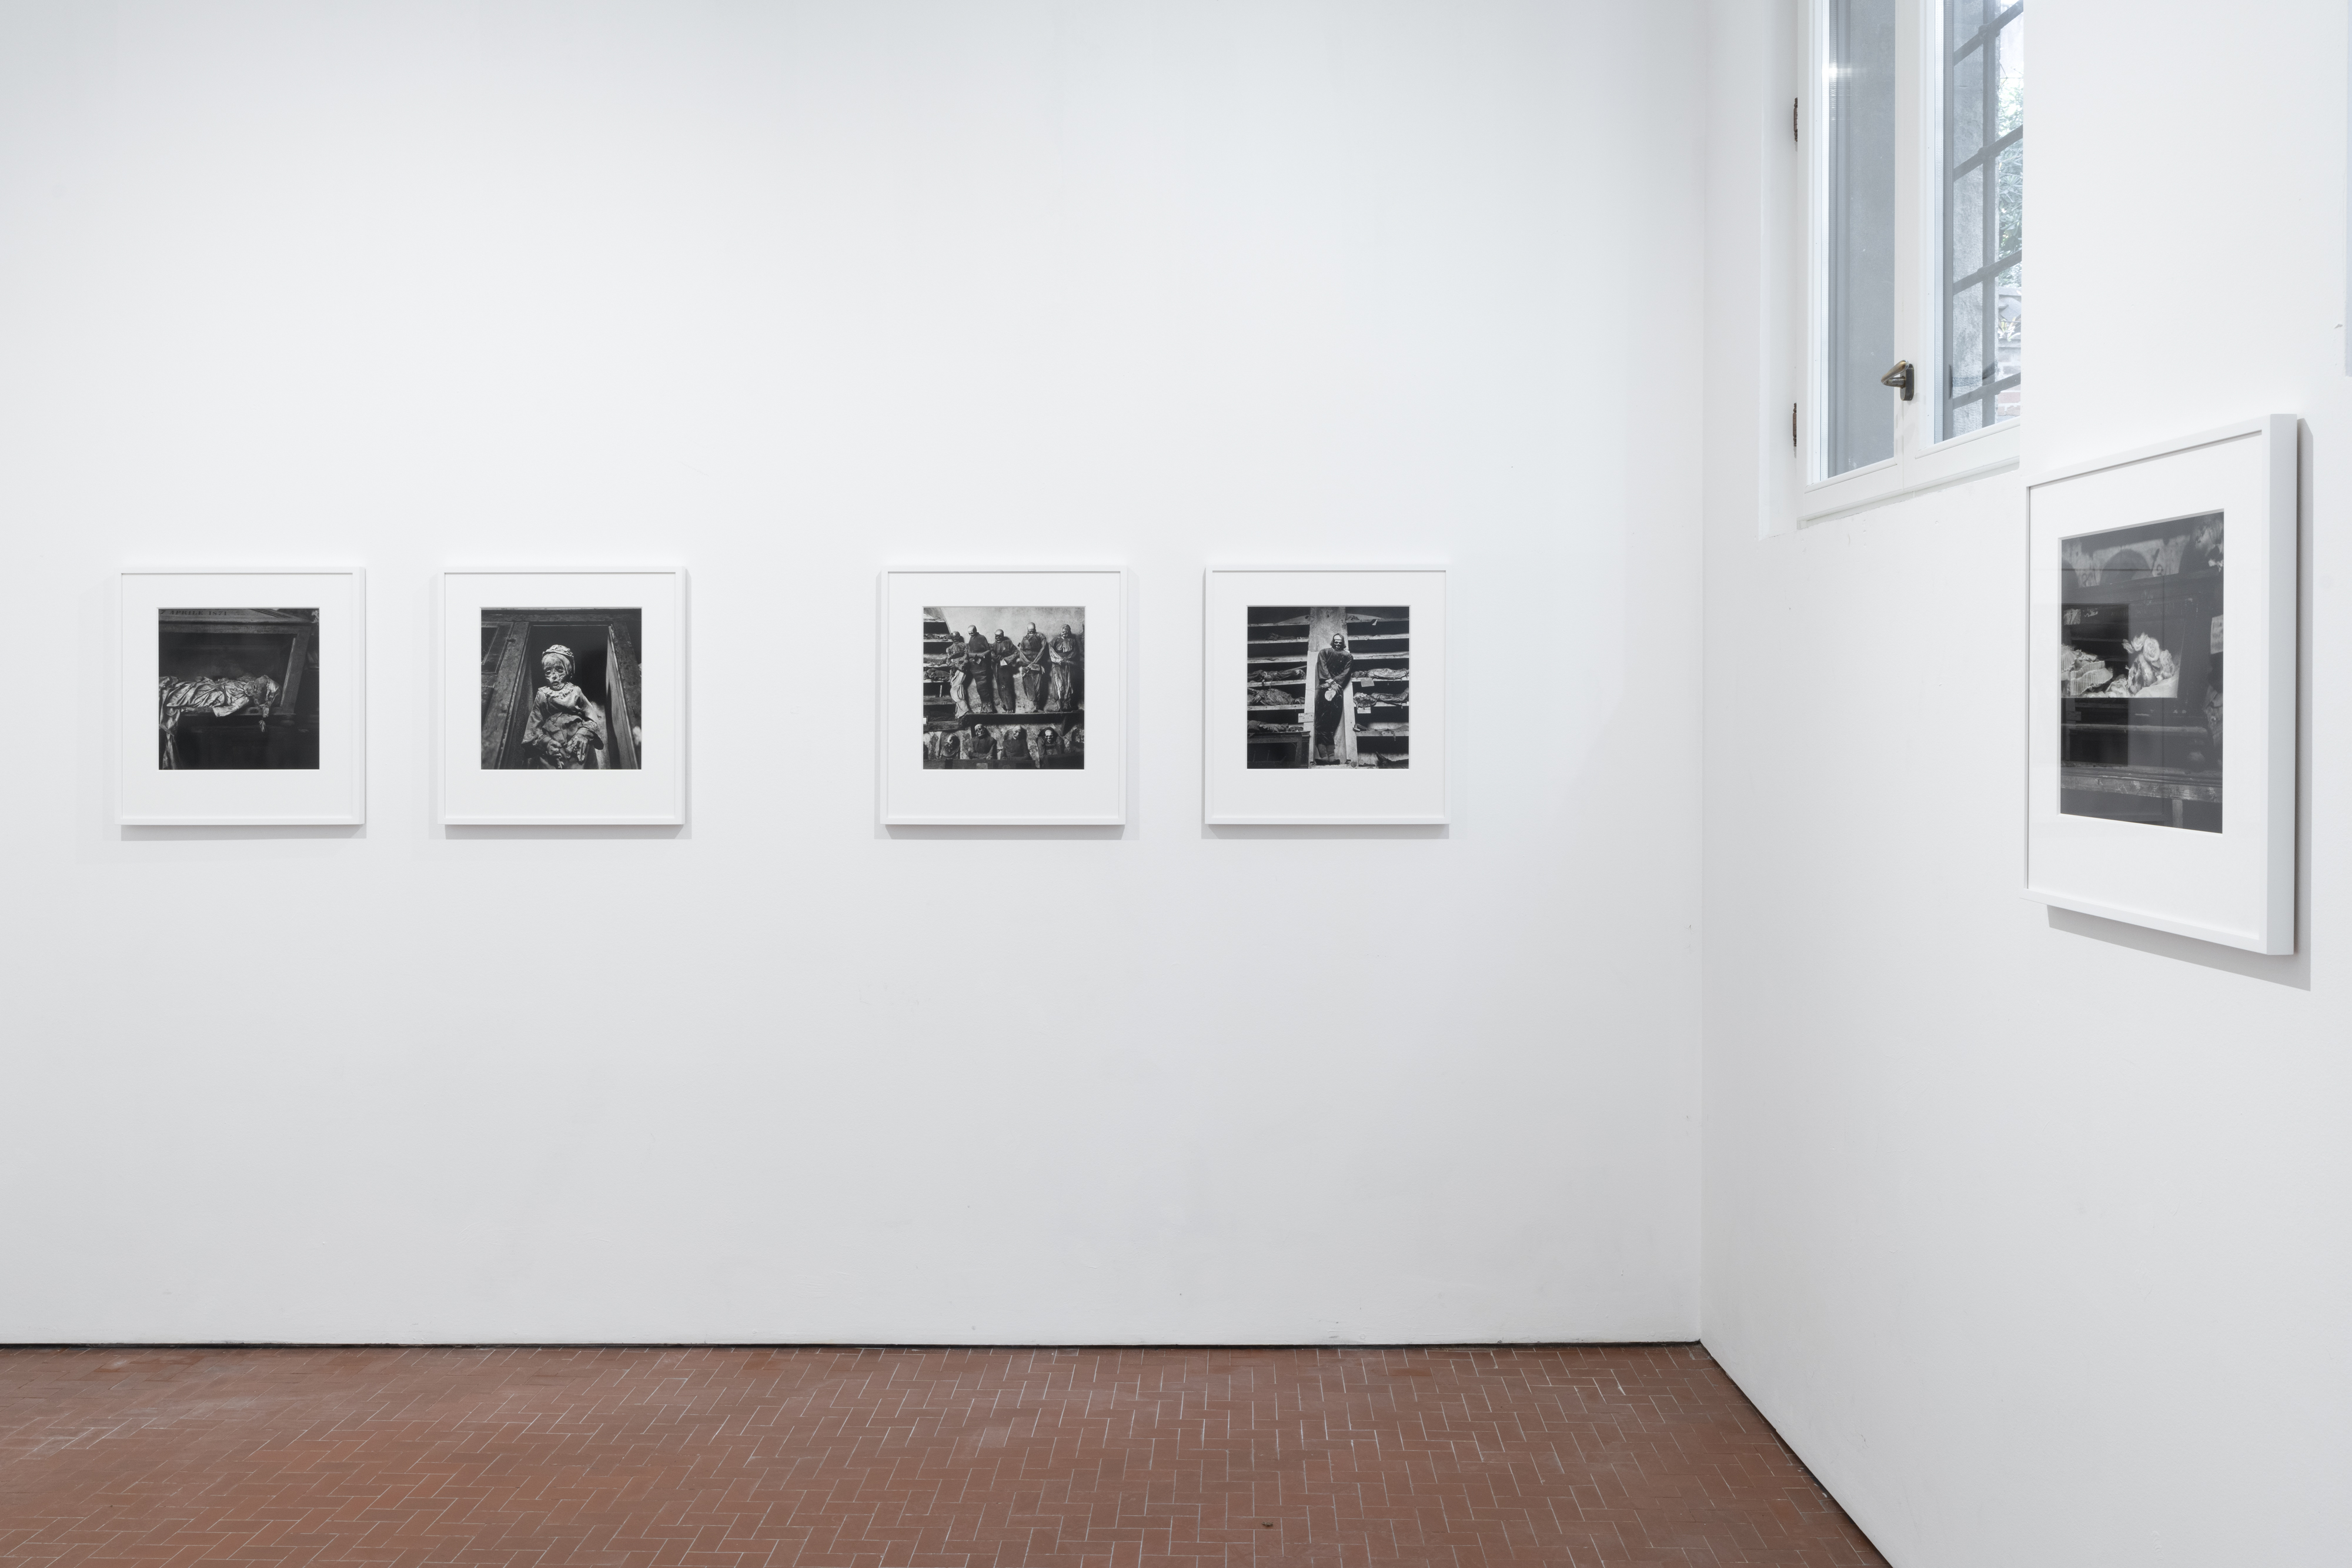 Color image of an exhibition of black and white photographs depicting various portraits framed in white on white walls